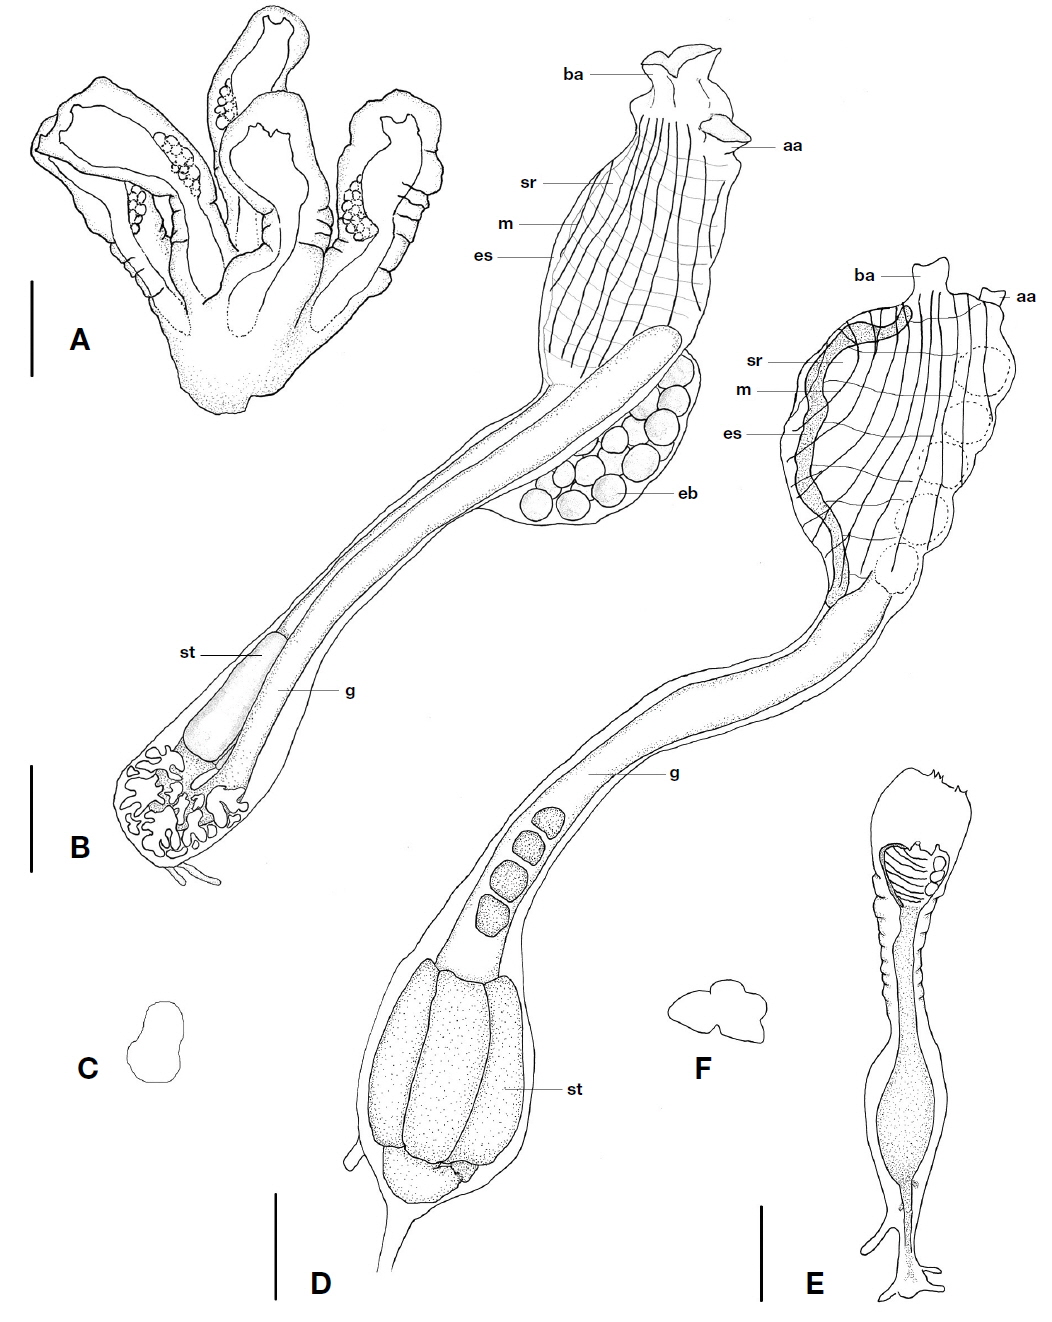 A, Colony of Clavelina elegans; B, Zooid of C. elegans; C, Cross section of stomach in C. elegans; D, Zooid of Clavelina miniata; E, Colony of C. miniata; F, Cross section of stomach in C. miniata. aa, atrial apertures; ba, branchial apertures; eb, embryo; es, endostyle; g, gut; m, muscles; sr, stigmata row; st, stomach. Scale bars: A, D=5 mm, B, E=2 mm.